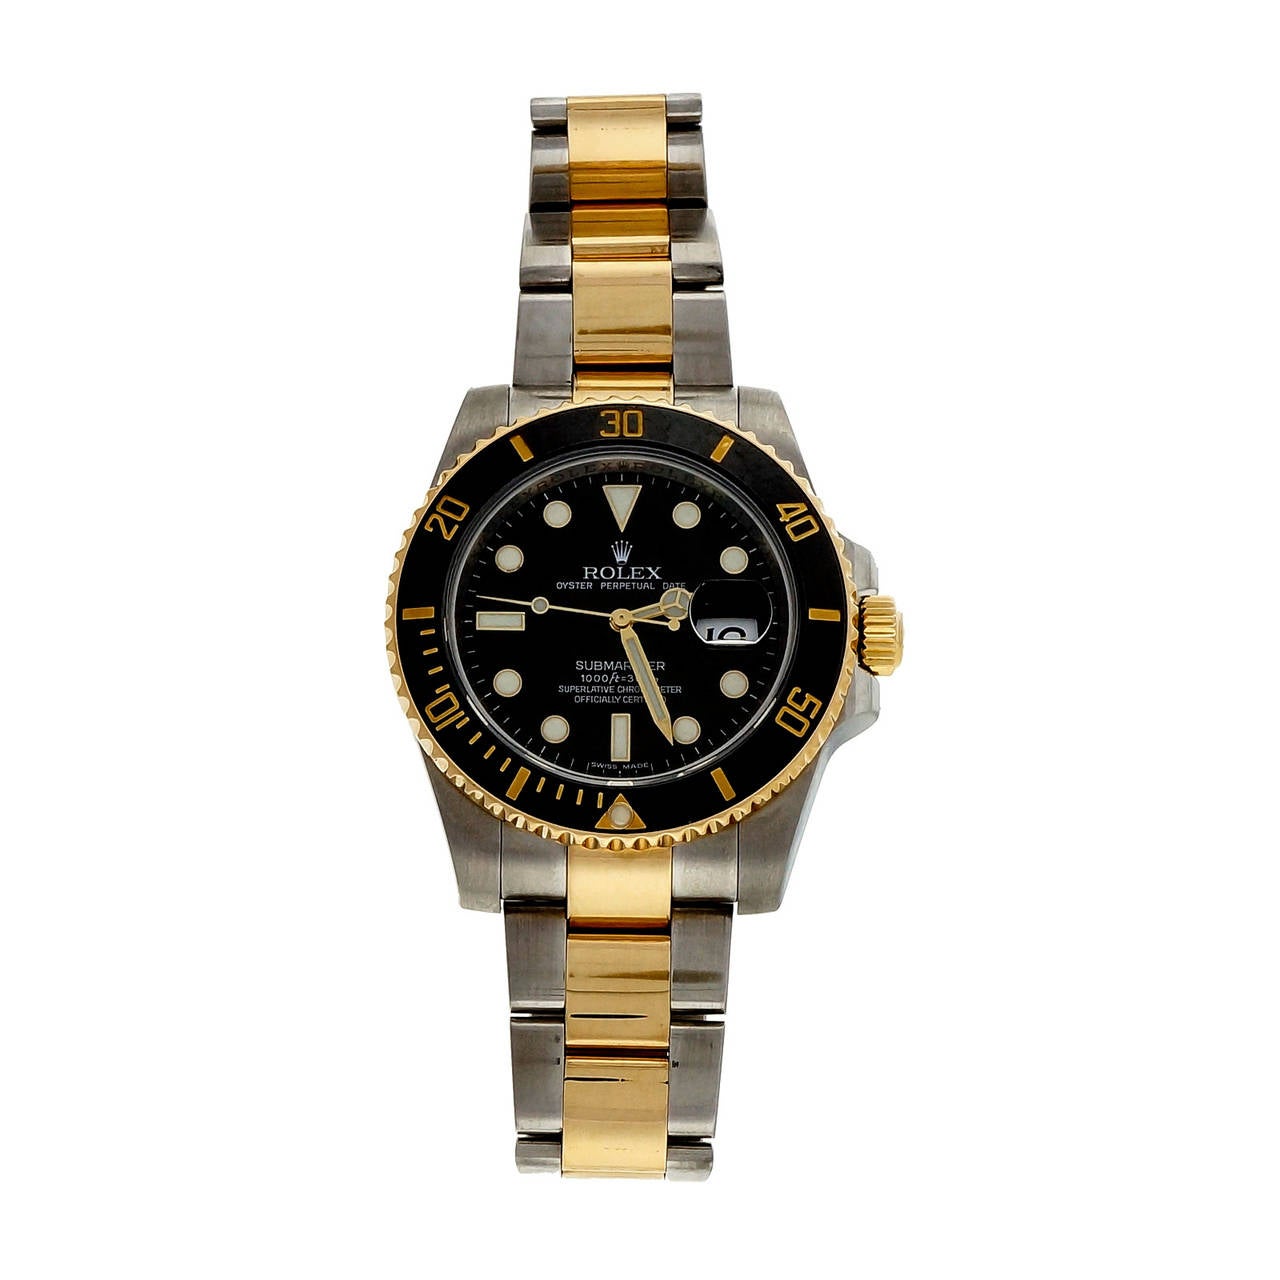 Men’s Rolex 18k gold and steel Submariner 116613 Ceramic bezel. Keeps excellent time. Newest style. Rare black on black model.

18k Yellow gold & Steel
Strap length: 8 inches
Box and papers included
Length: 47.6mm
Width: 40mm
Band width at